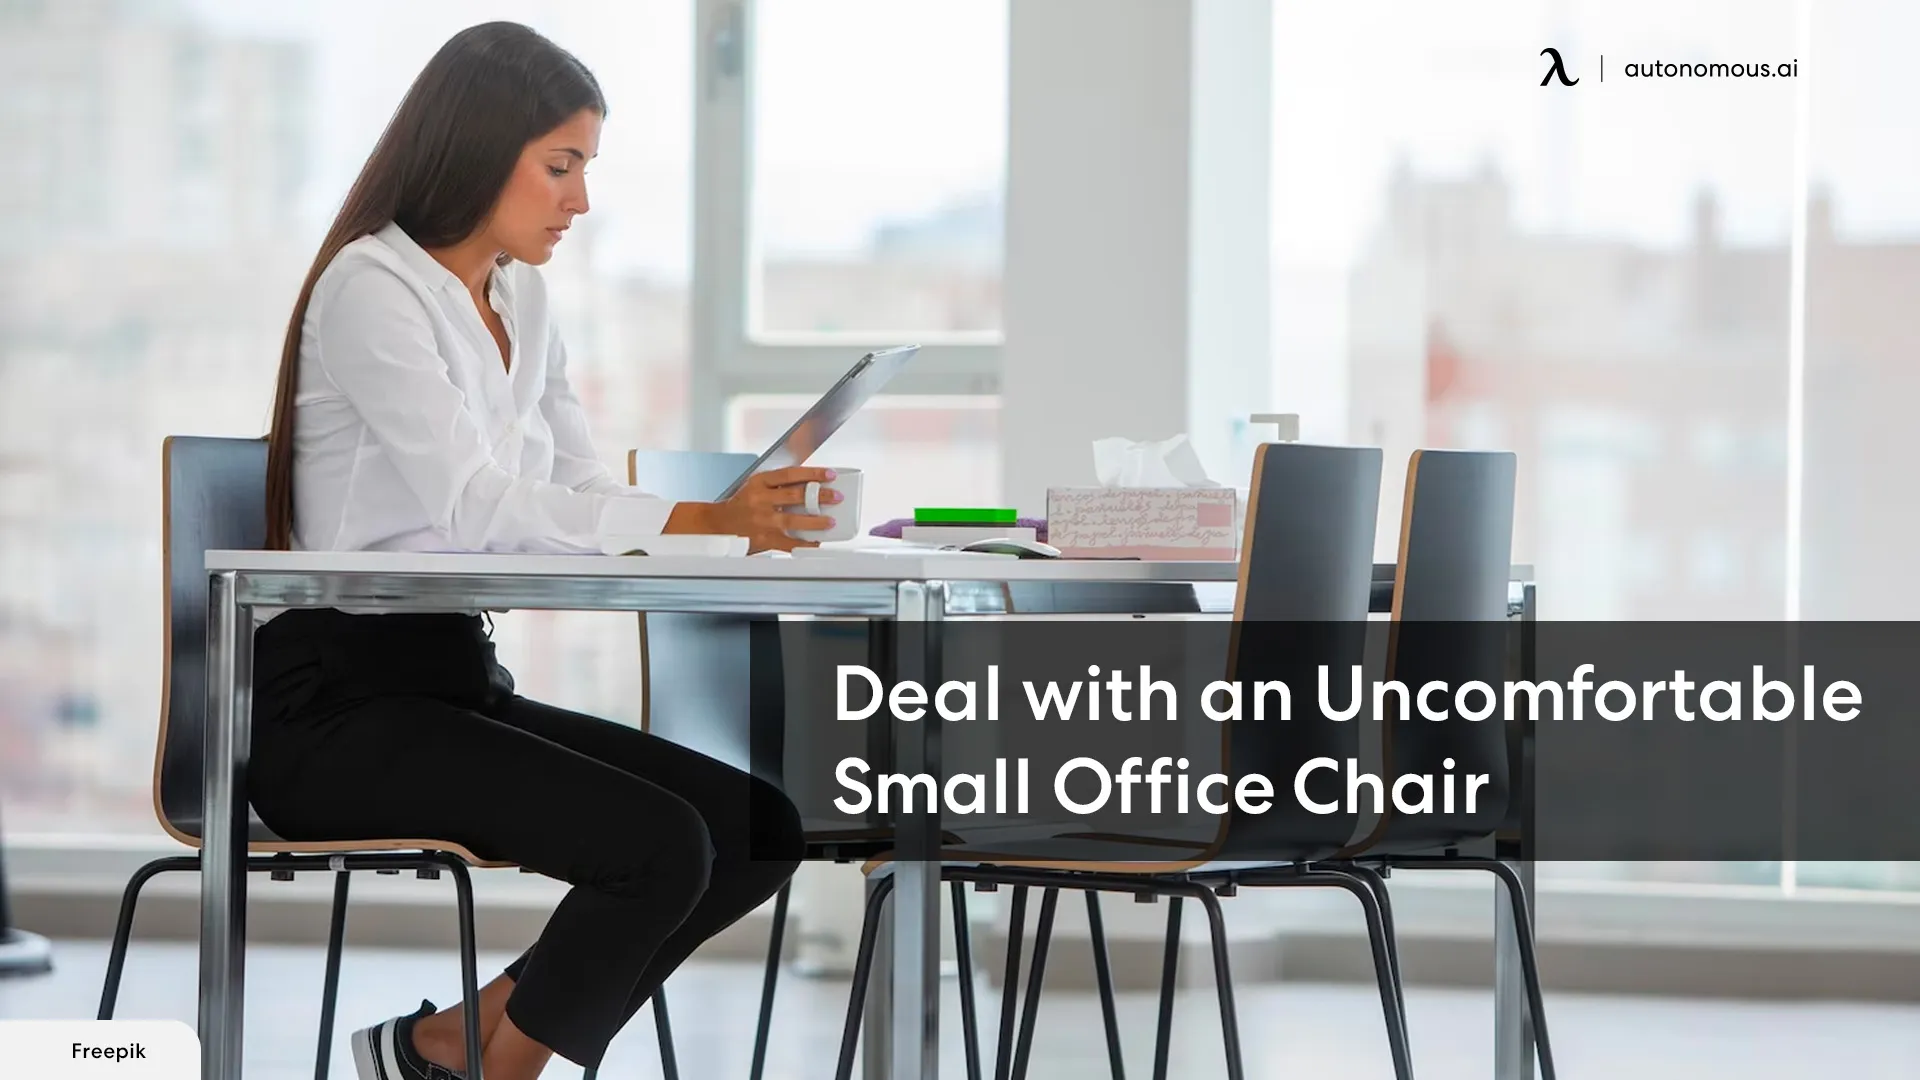 9 Great Tips for Dealing With an Uncomfortable Small Office Chair